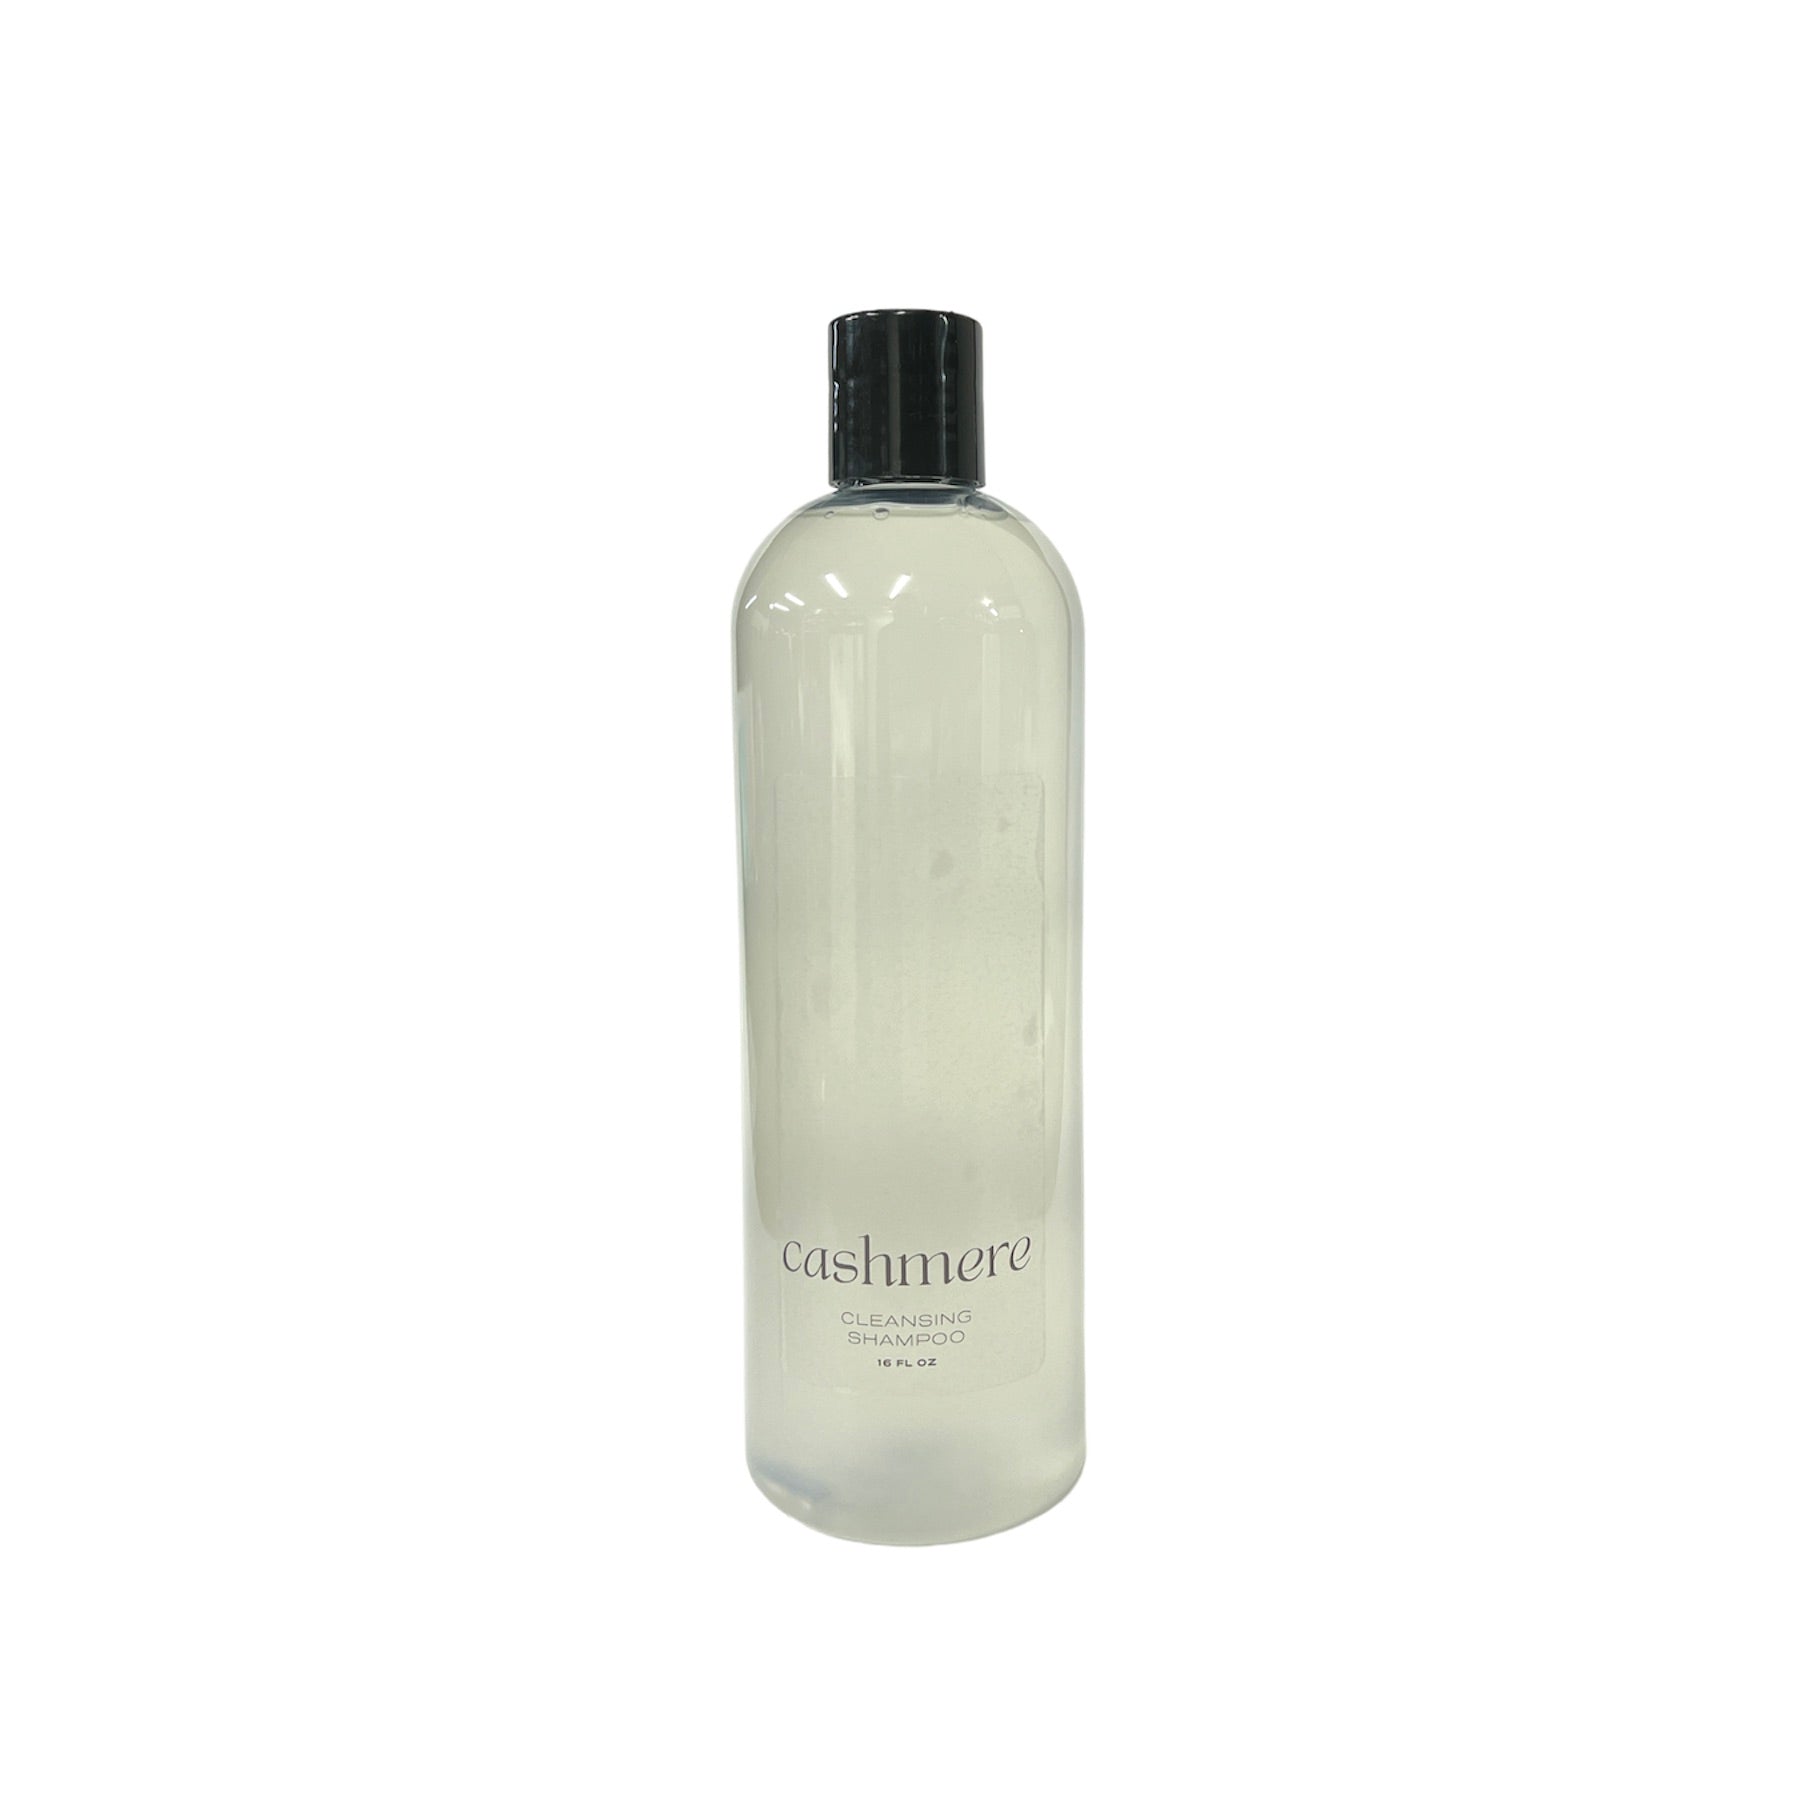 Cashmere Cleansing Shampoo